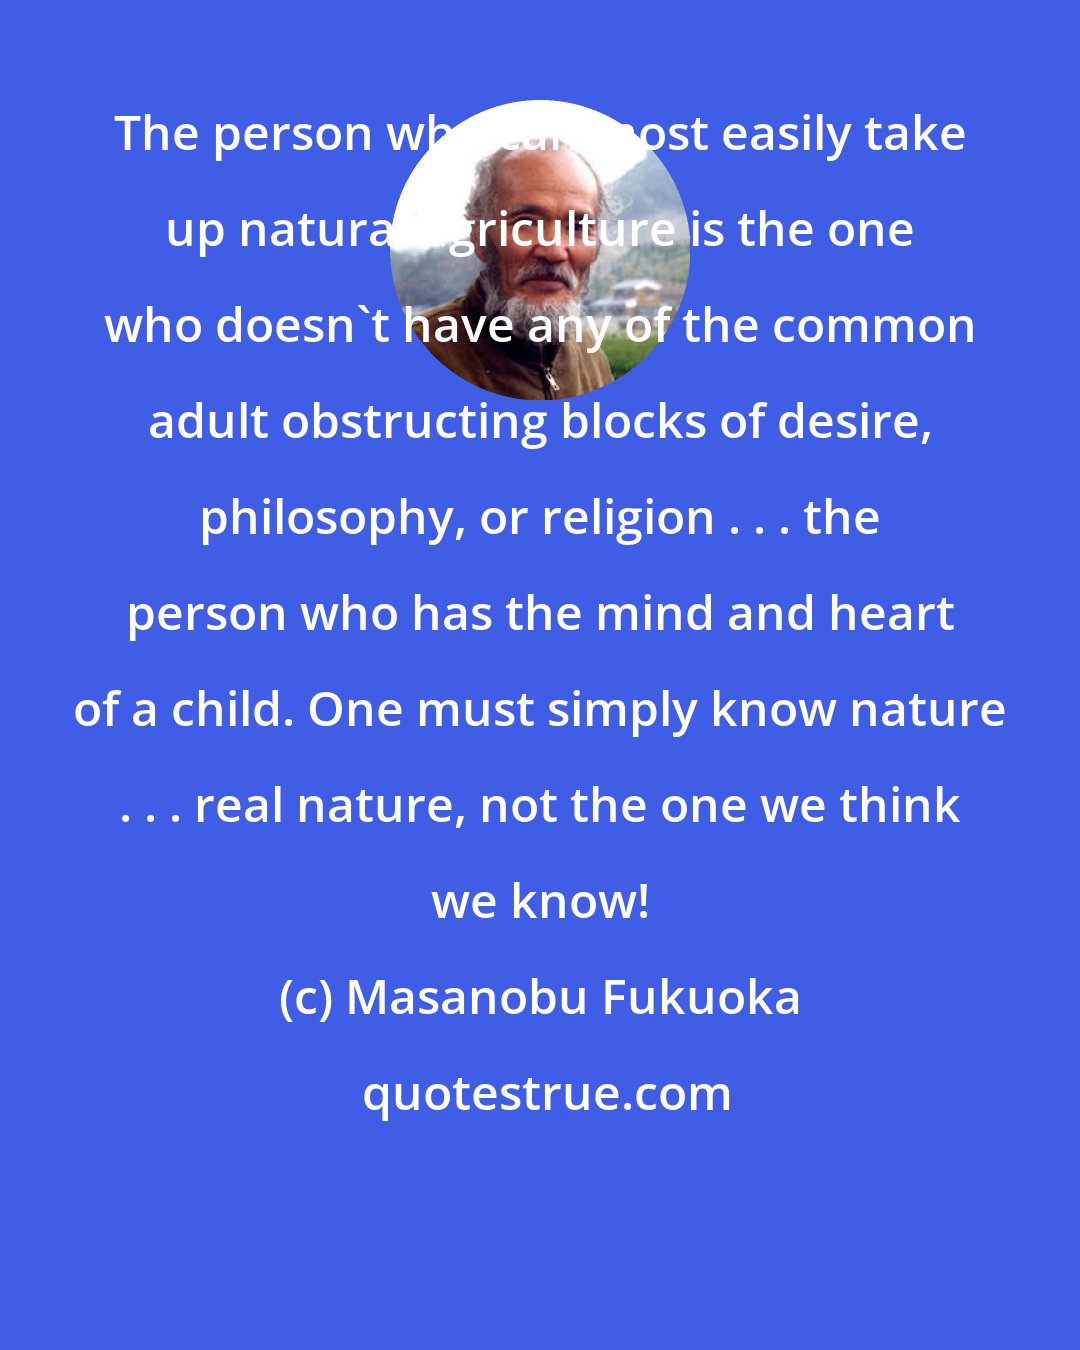 Masanobu Fukuoka: The person who can most easily take up natural agriculture is the one who doesn't have any of the common adult obstructing blocks of desire, philosophy, or religion . . . the person who has the mind and heart of a child. One must simply know nature . . . real nature, not the one we think we know!